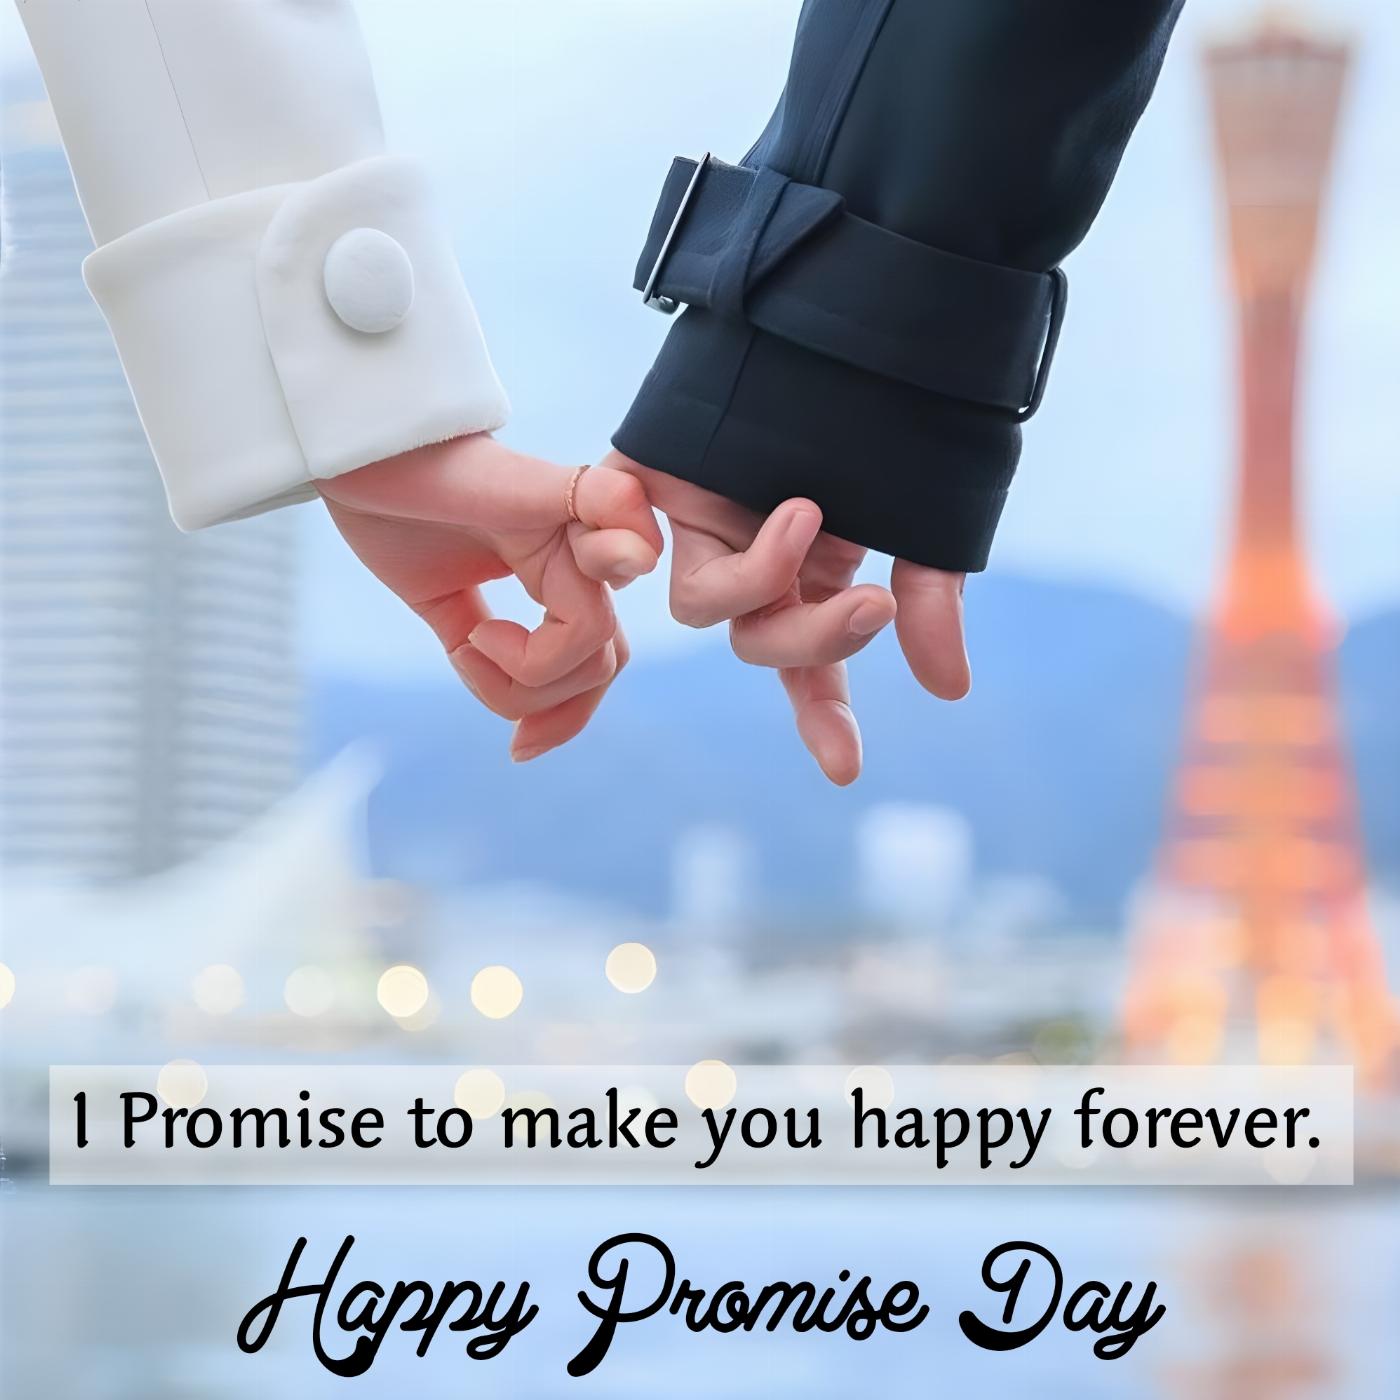 I Promise to make you happy forever